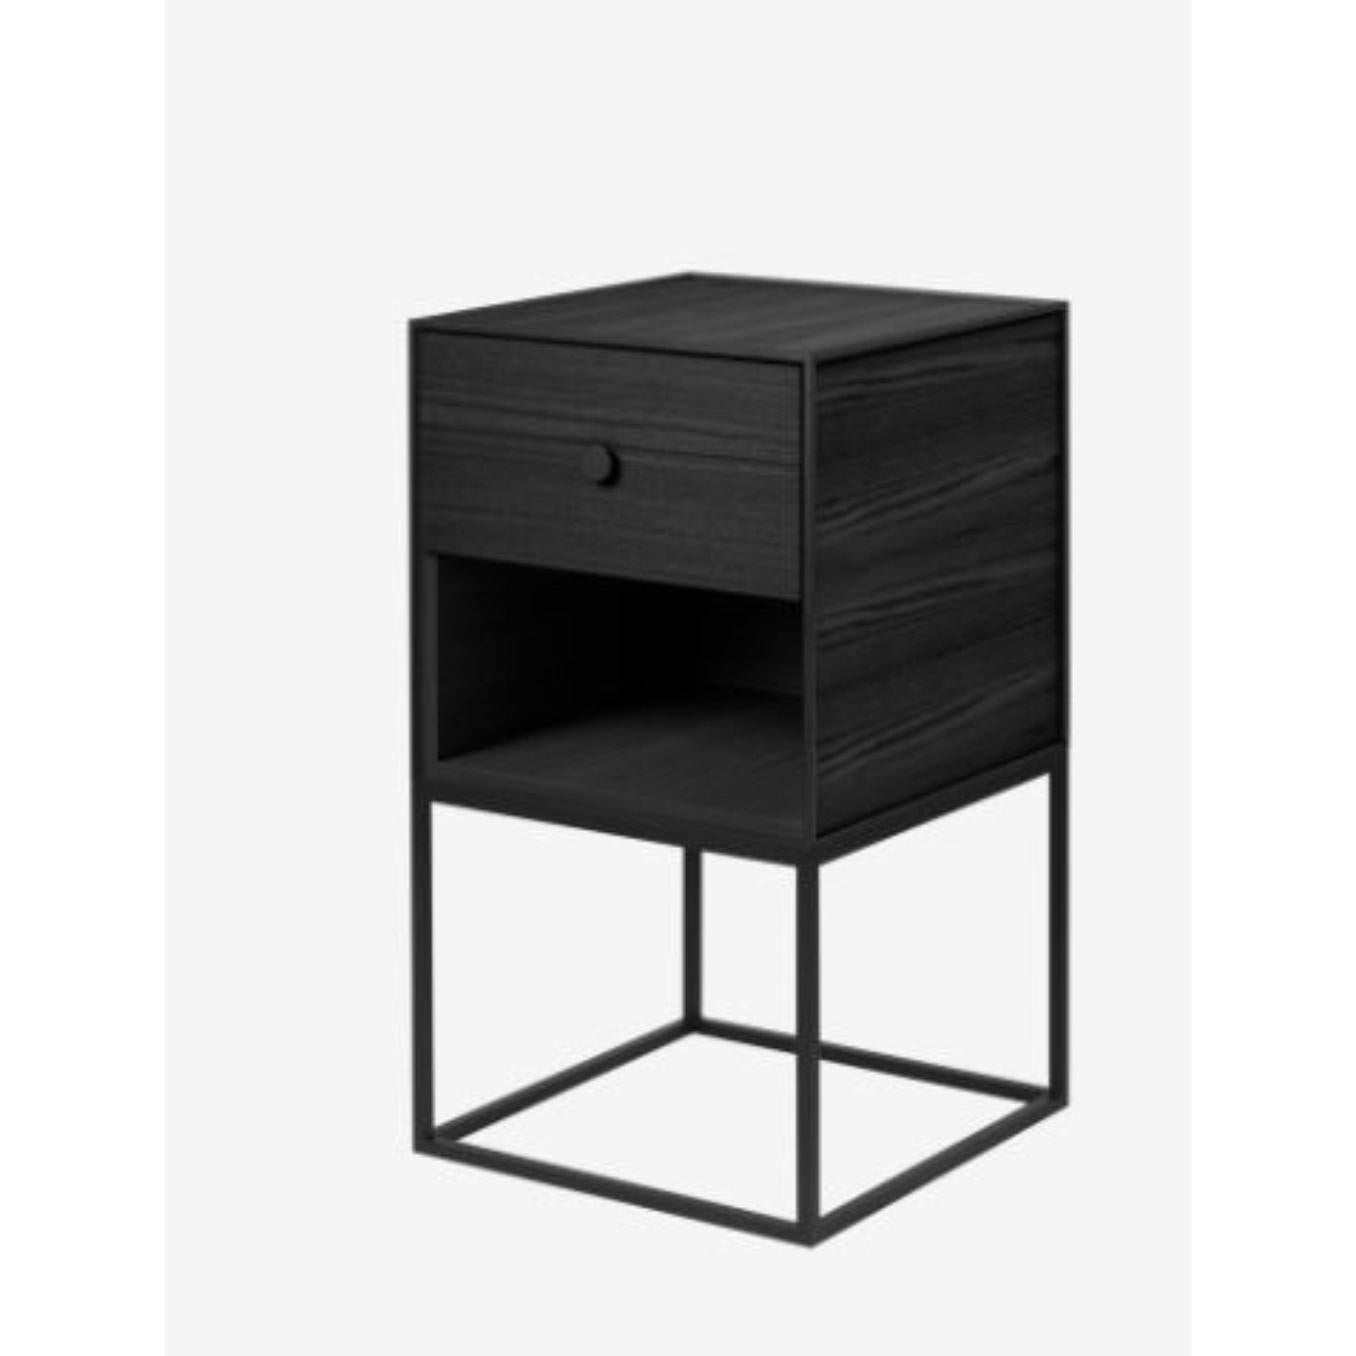 35 black ash frame sideboard with 1 drawer by Lassen
Dimensions: W 35 x D 35 x H 63 cm 
Materials: Finér, Melamin, Melamine, Metal, Veneer, Ash
Also available in different colors and dimensions. 
Weight: 15.50 Kg

By Lassen is a Danish design